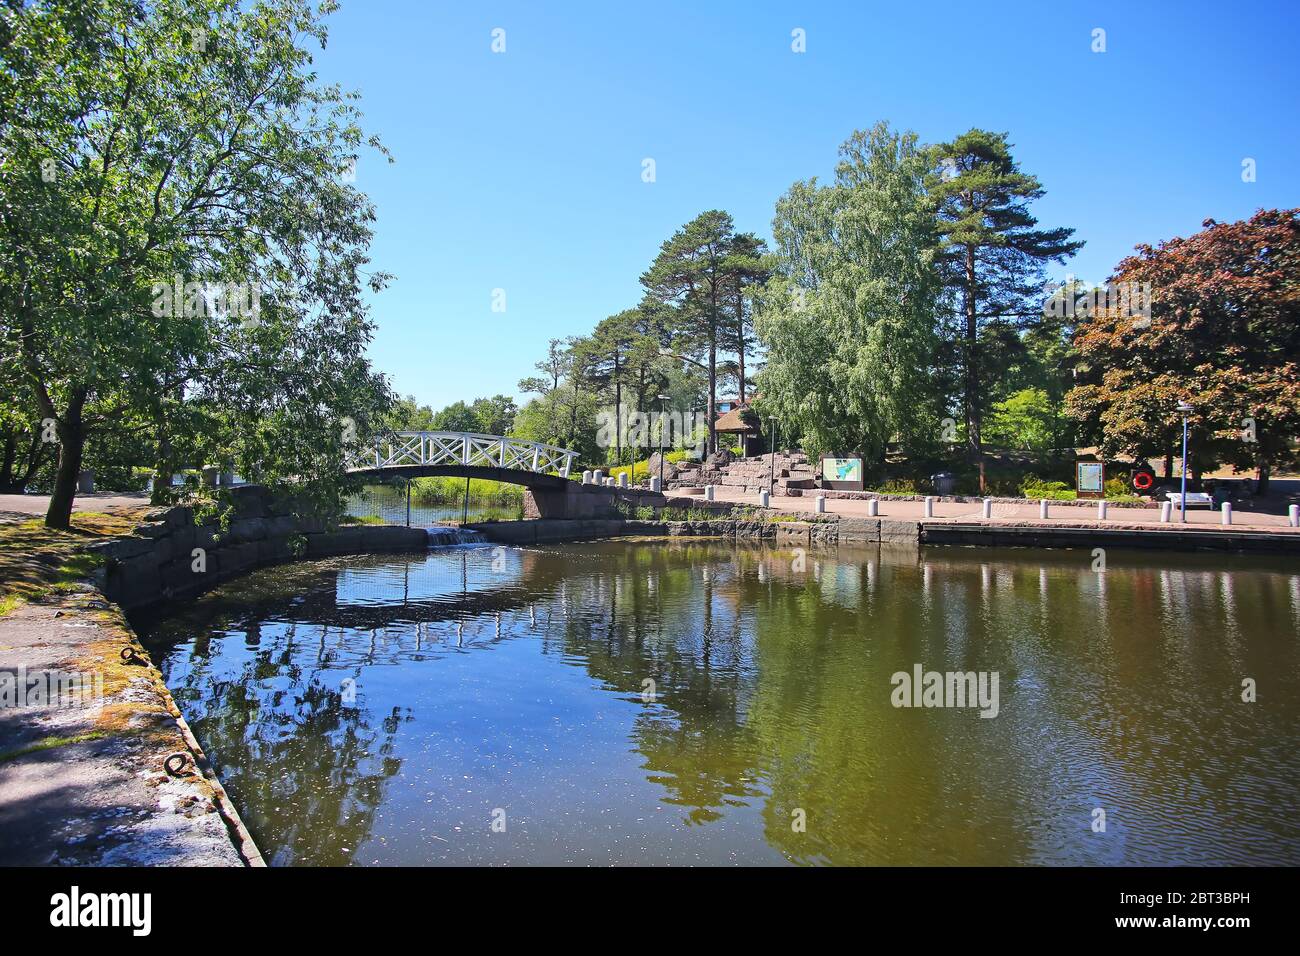 Landscape of Sapokka water park which is a charming city center public garden. Kotka, Finland. Stock Photo